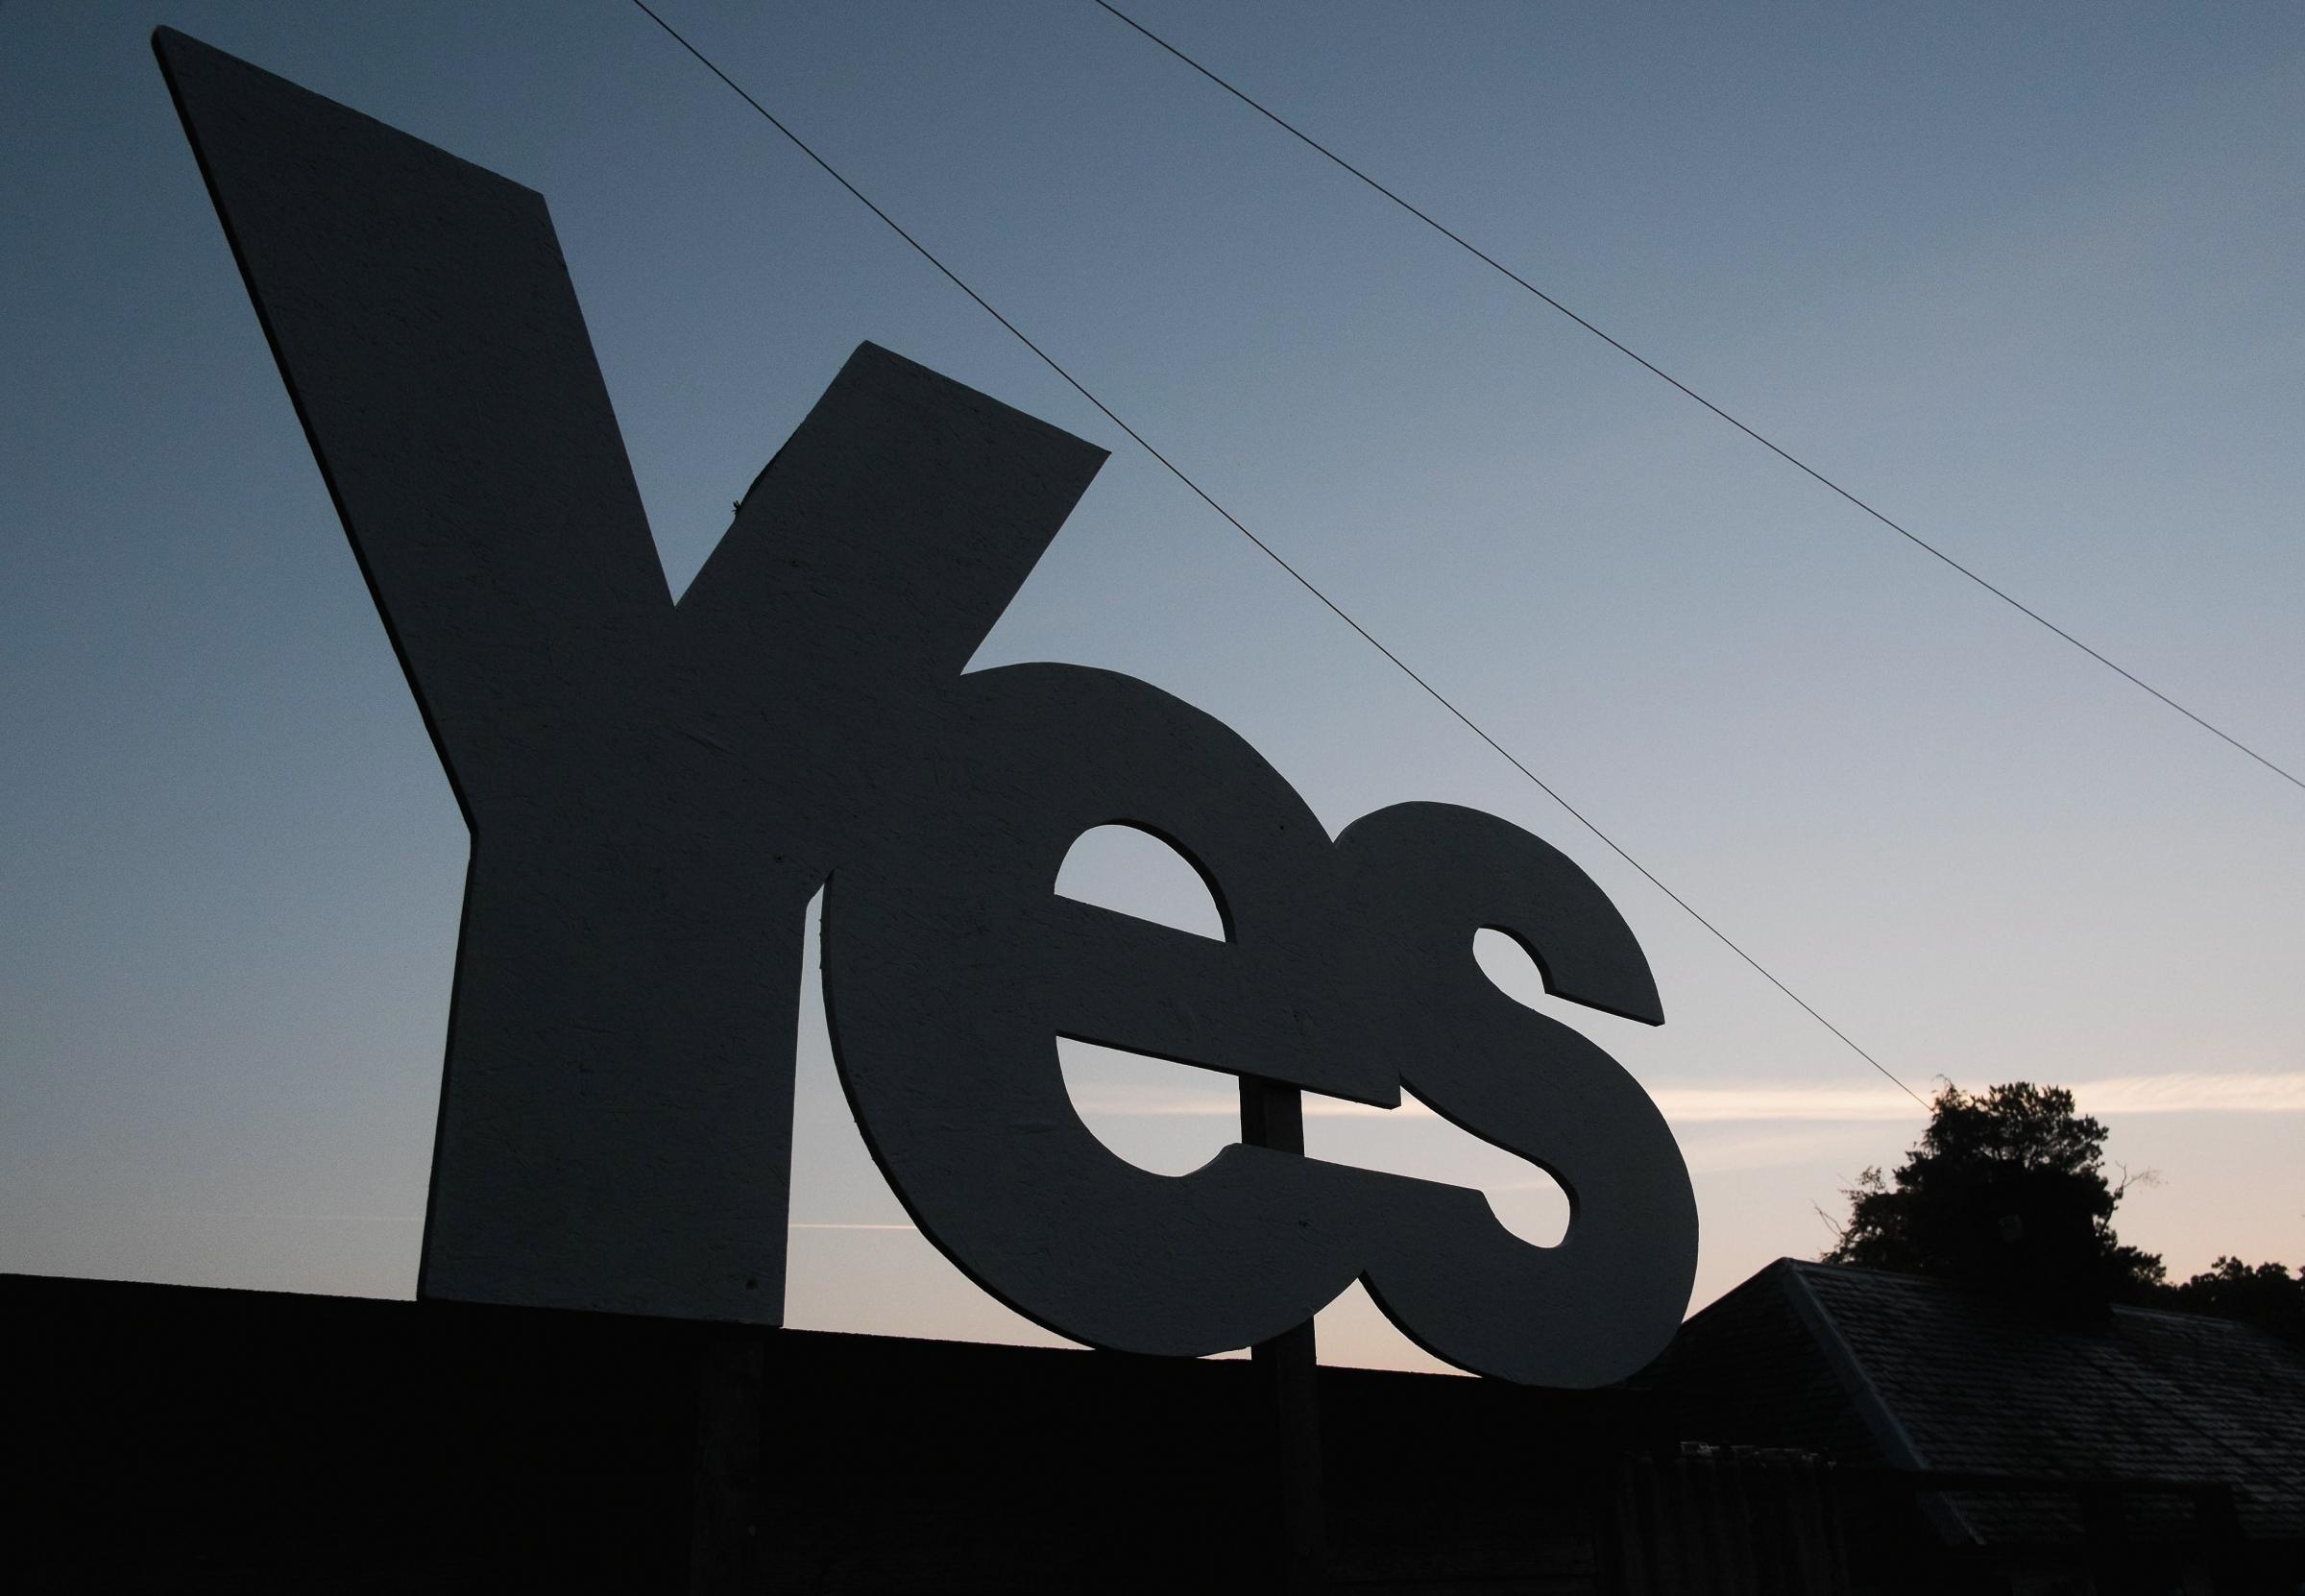 Mark Smith: The vulgarity of “Yes” signs